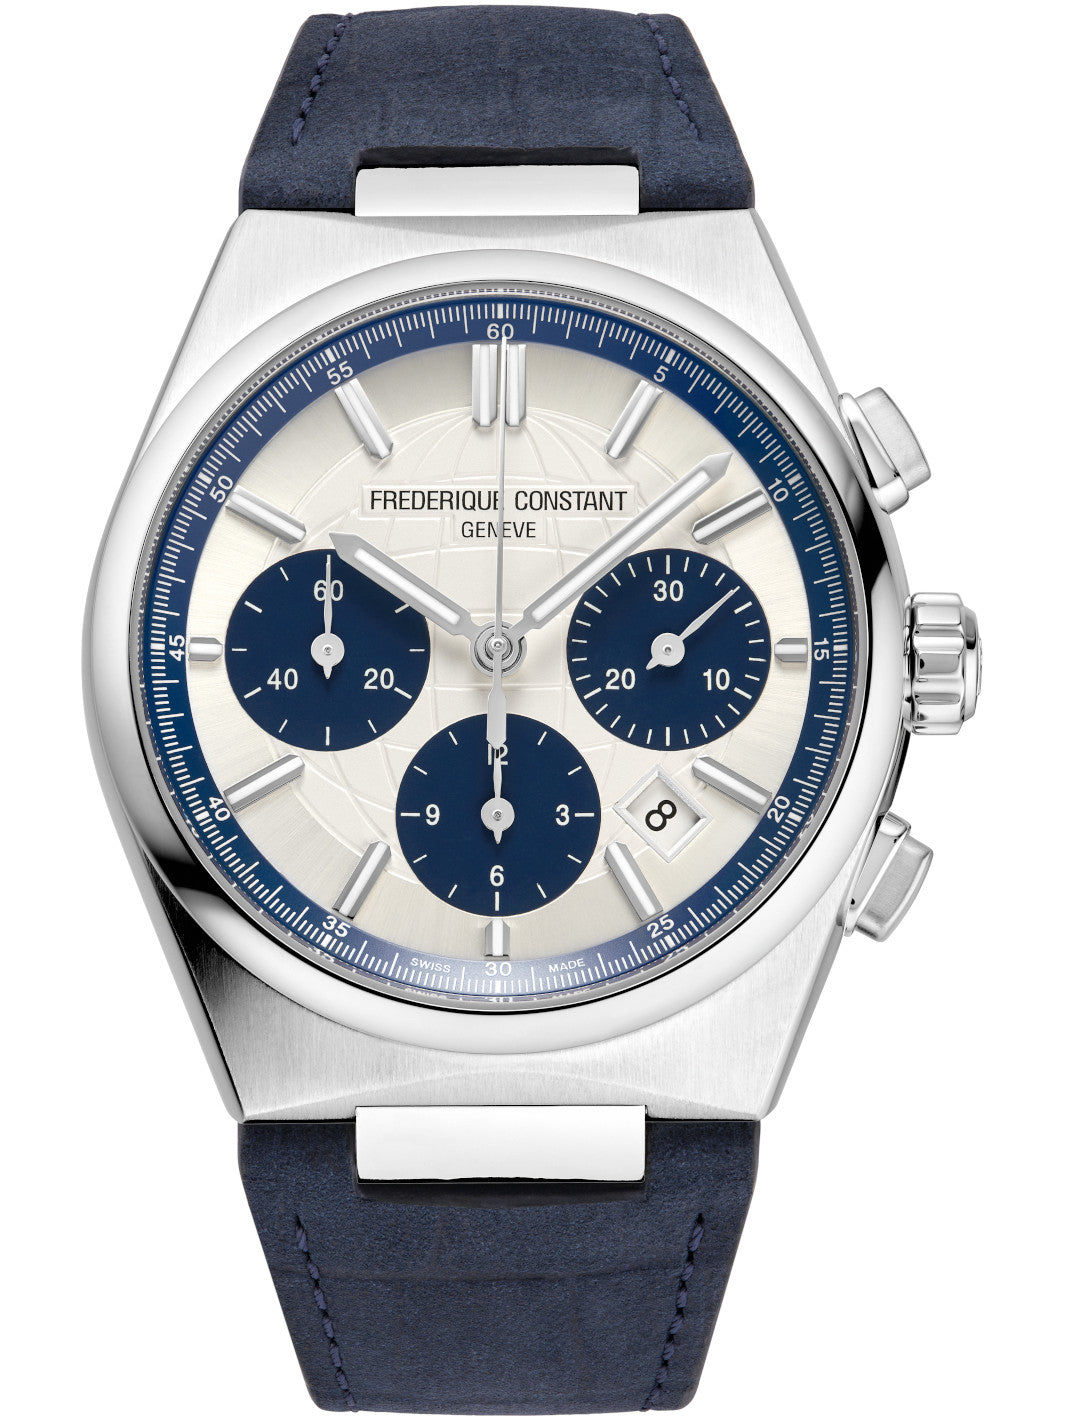 HIGHLIFE CHRONOGRAPH AUTOMATIC FC-391WN4NH6 LIMITED EDITION TO 1888 PIECES